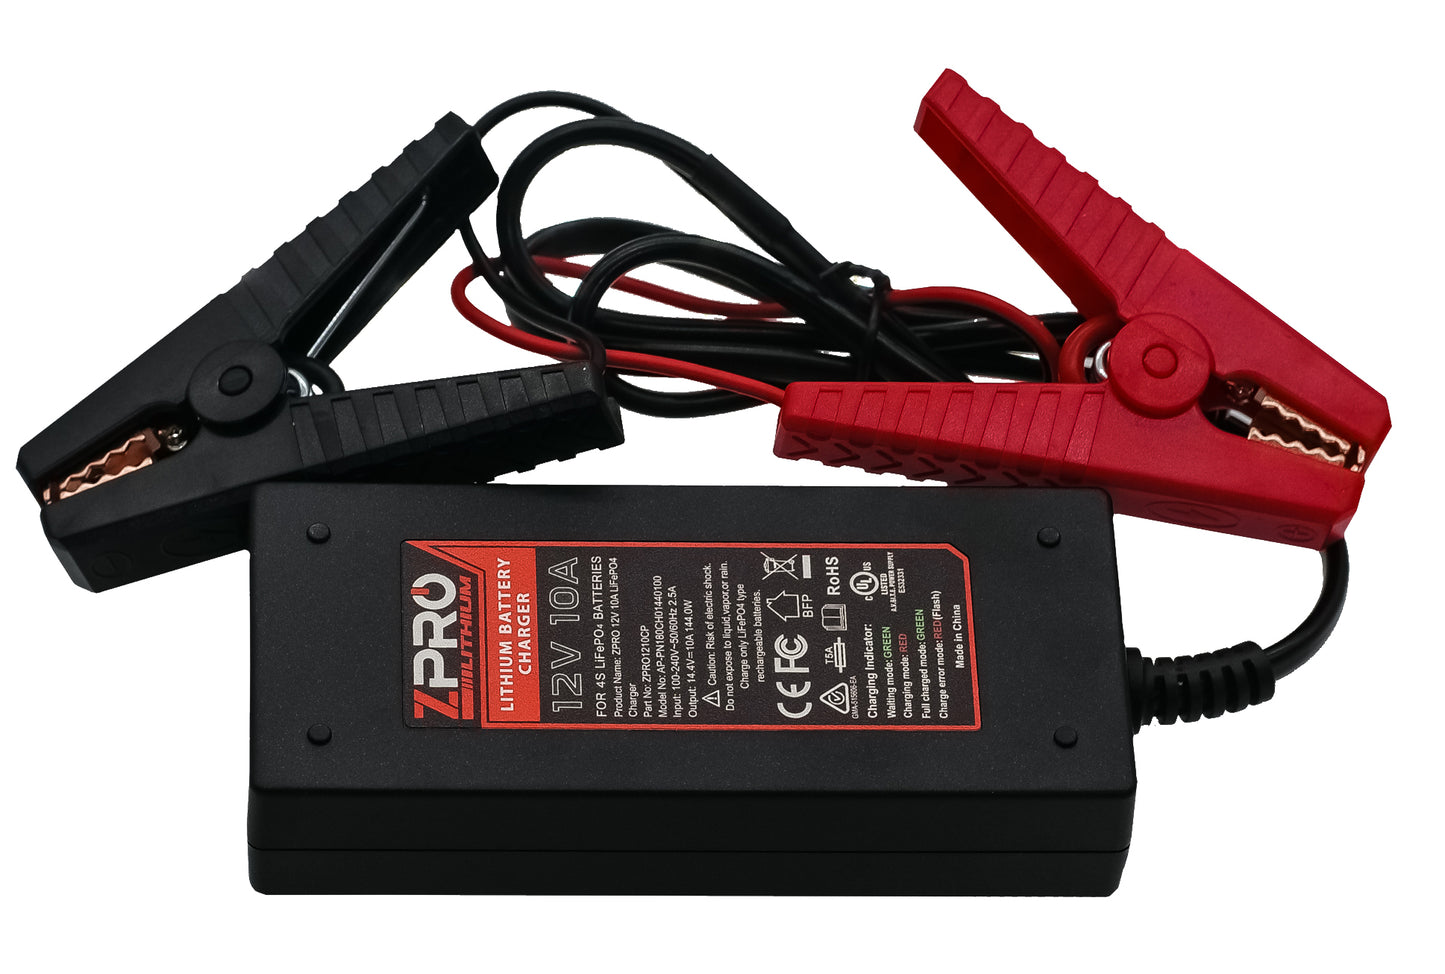 12V10A LITHIUM CHARGER